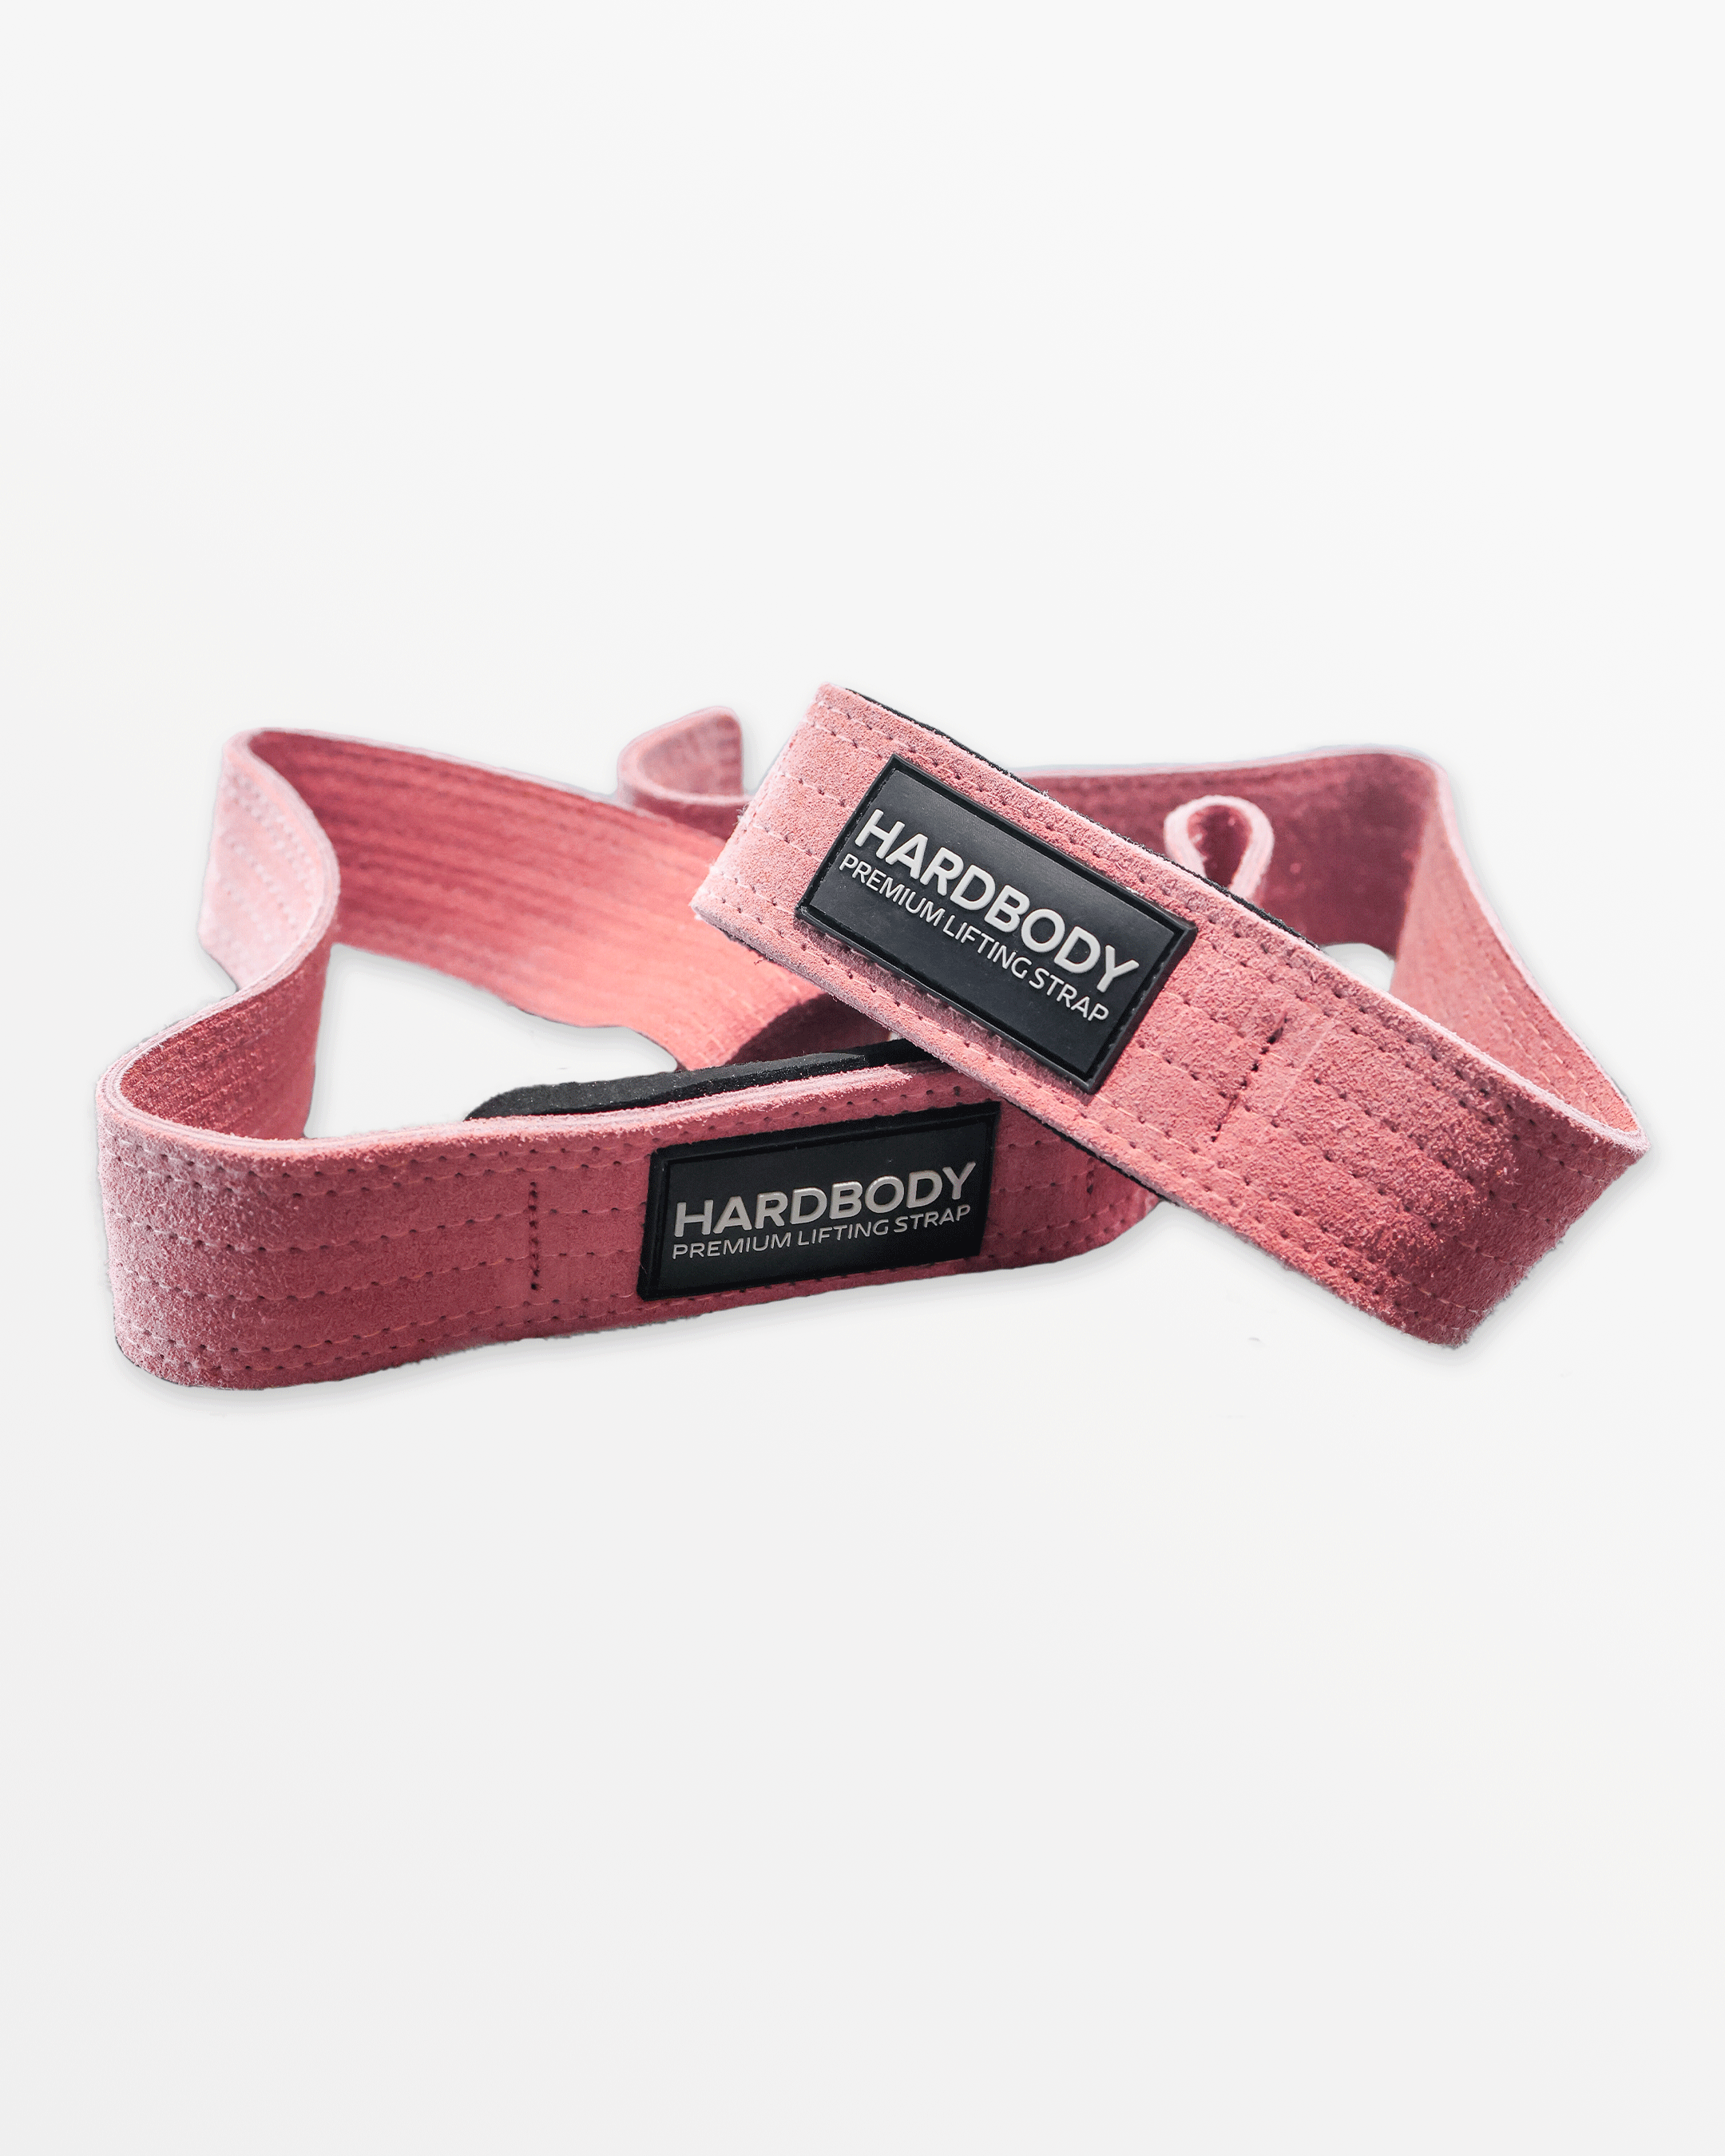 Dusty Pink Lifting Straps